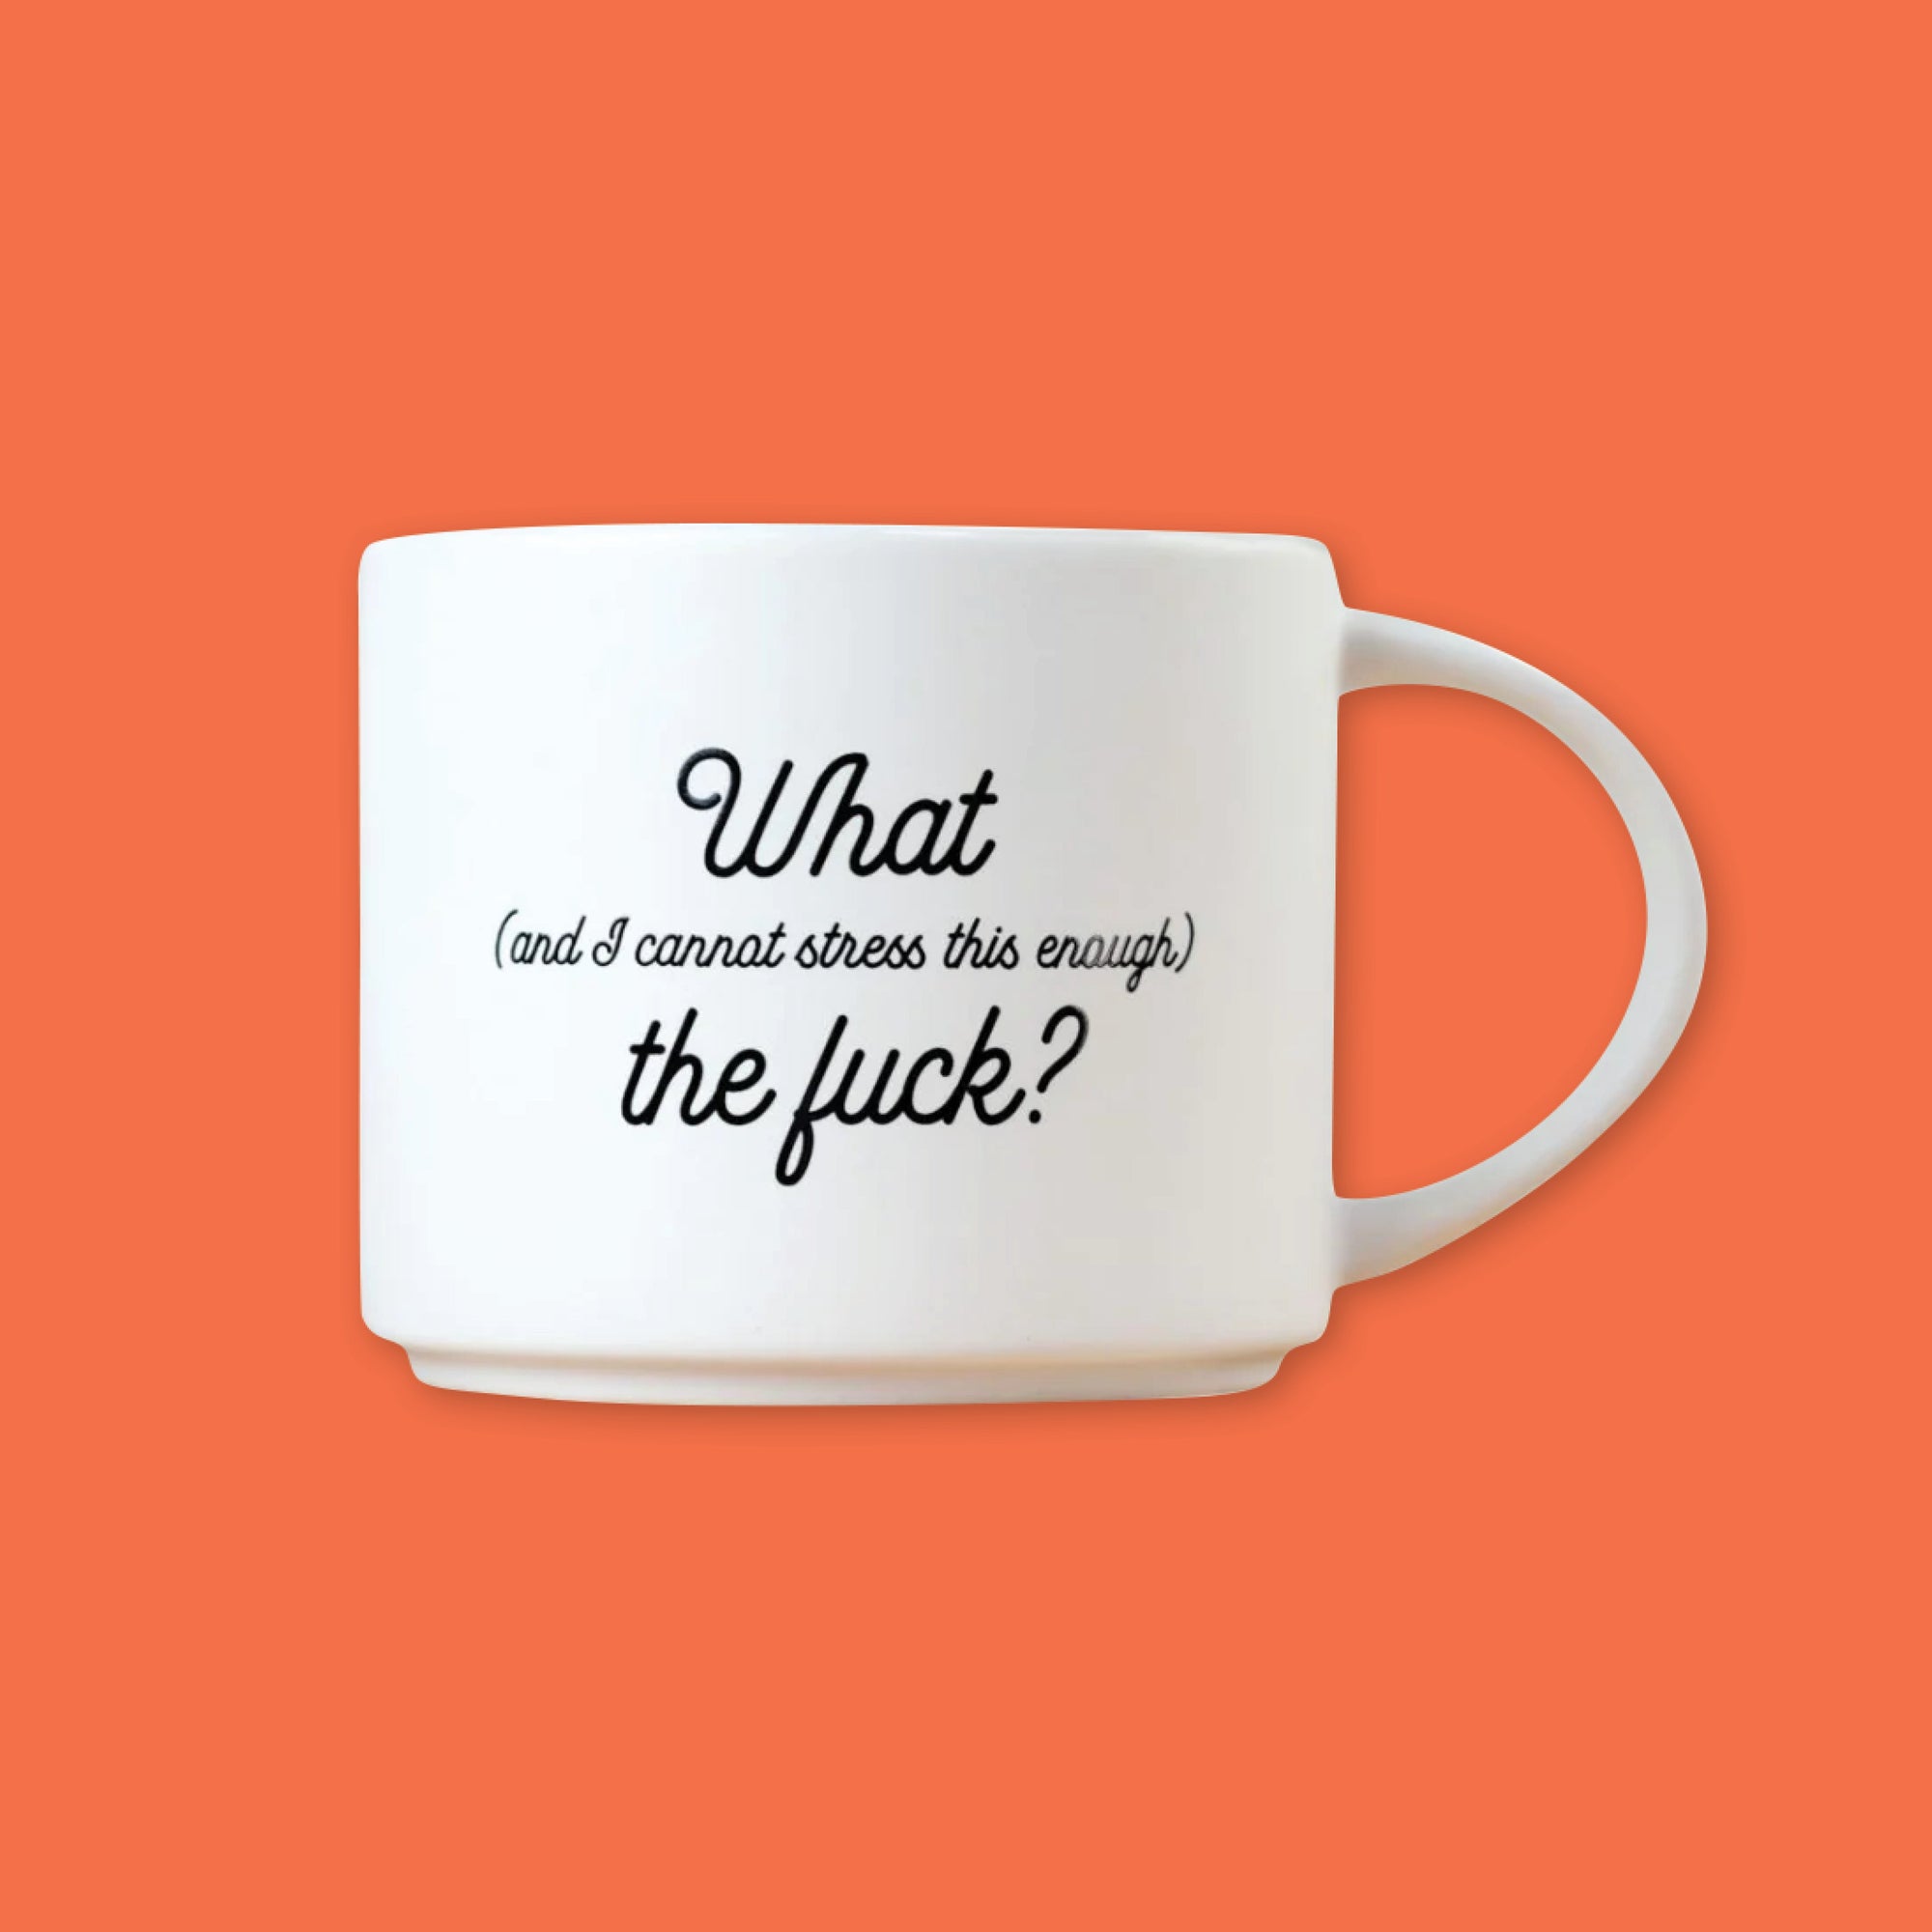 On an orangey red backgound is a photo of a white mug. The mug is a white diner style mug that says in black script, "What (and I cannot stress this enough) the fuck?" 